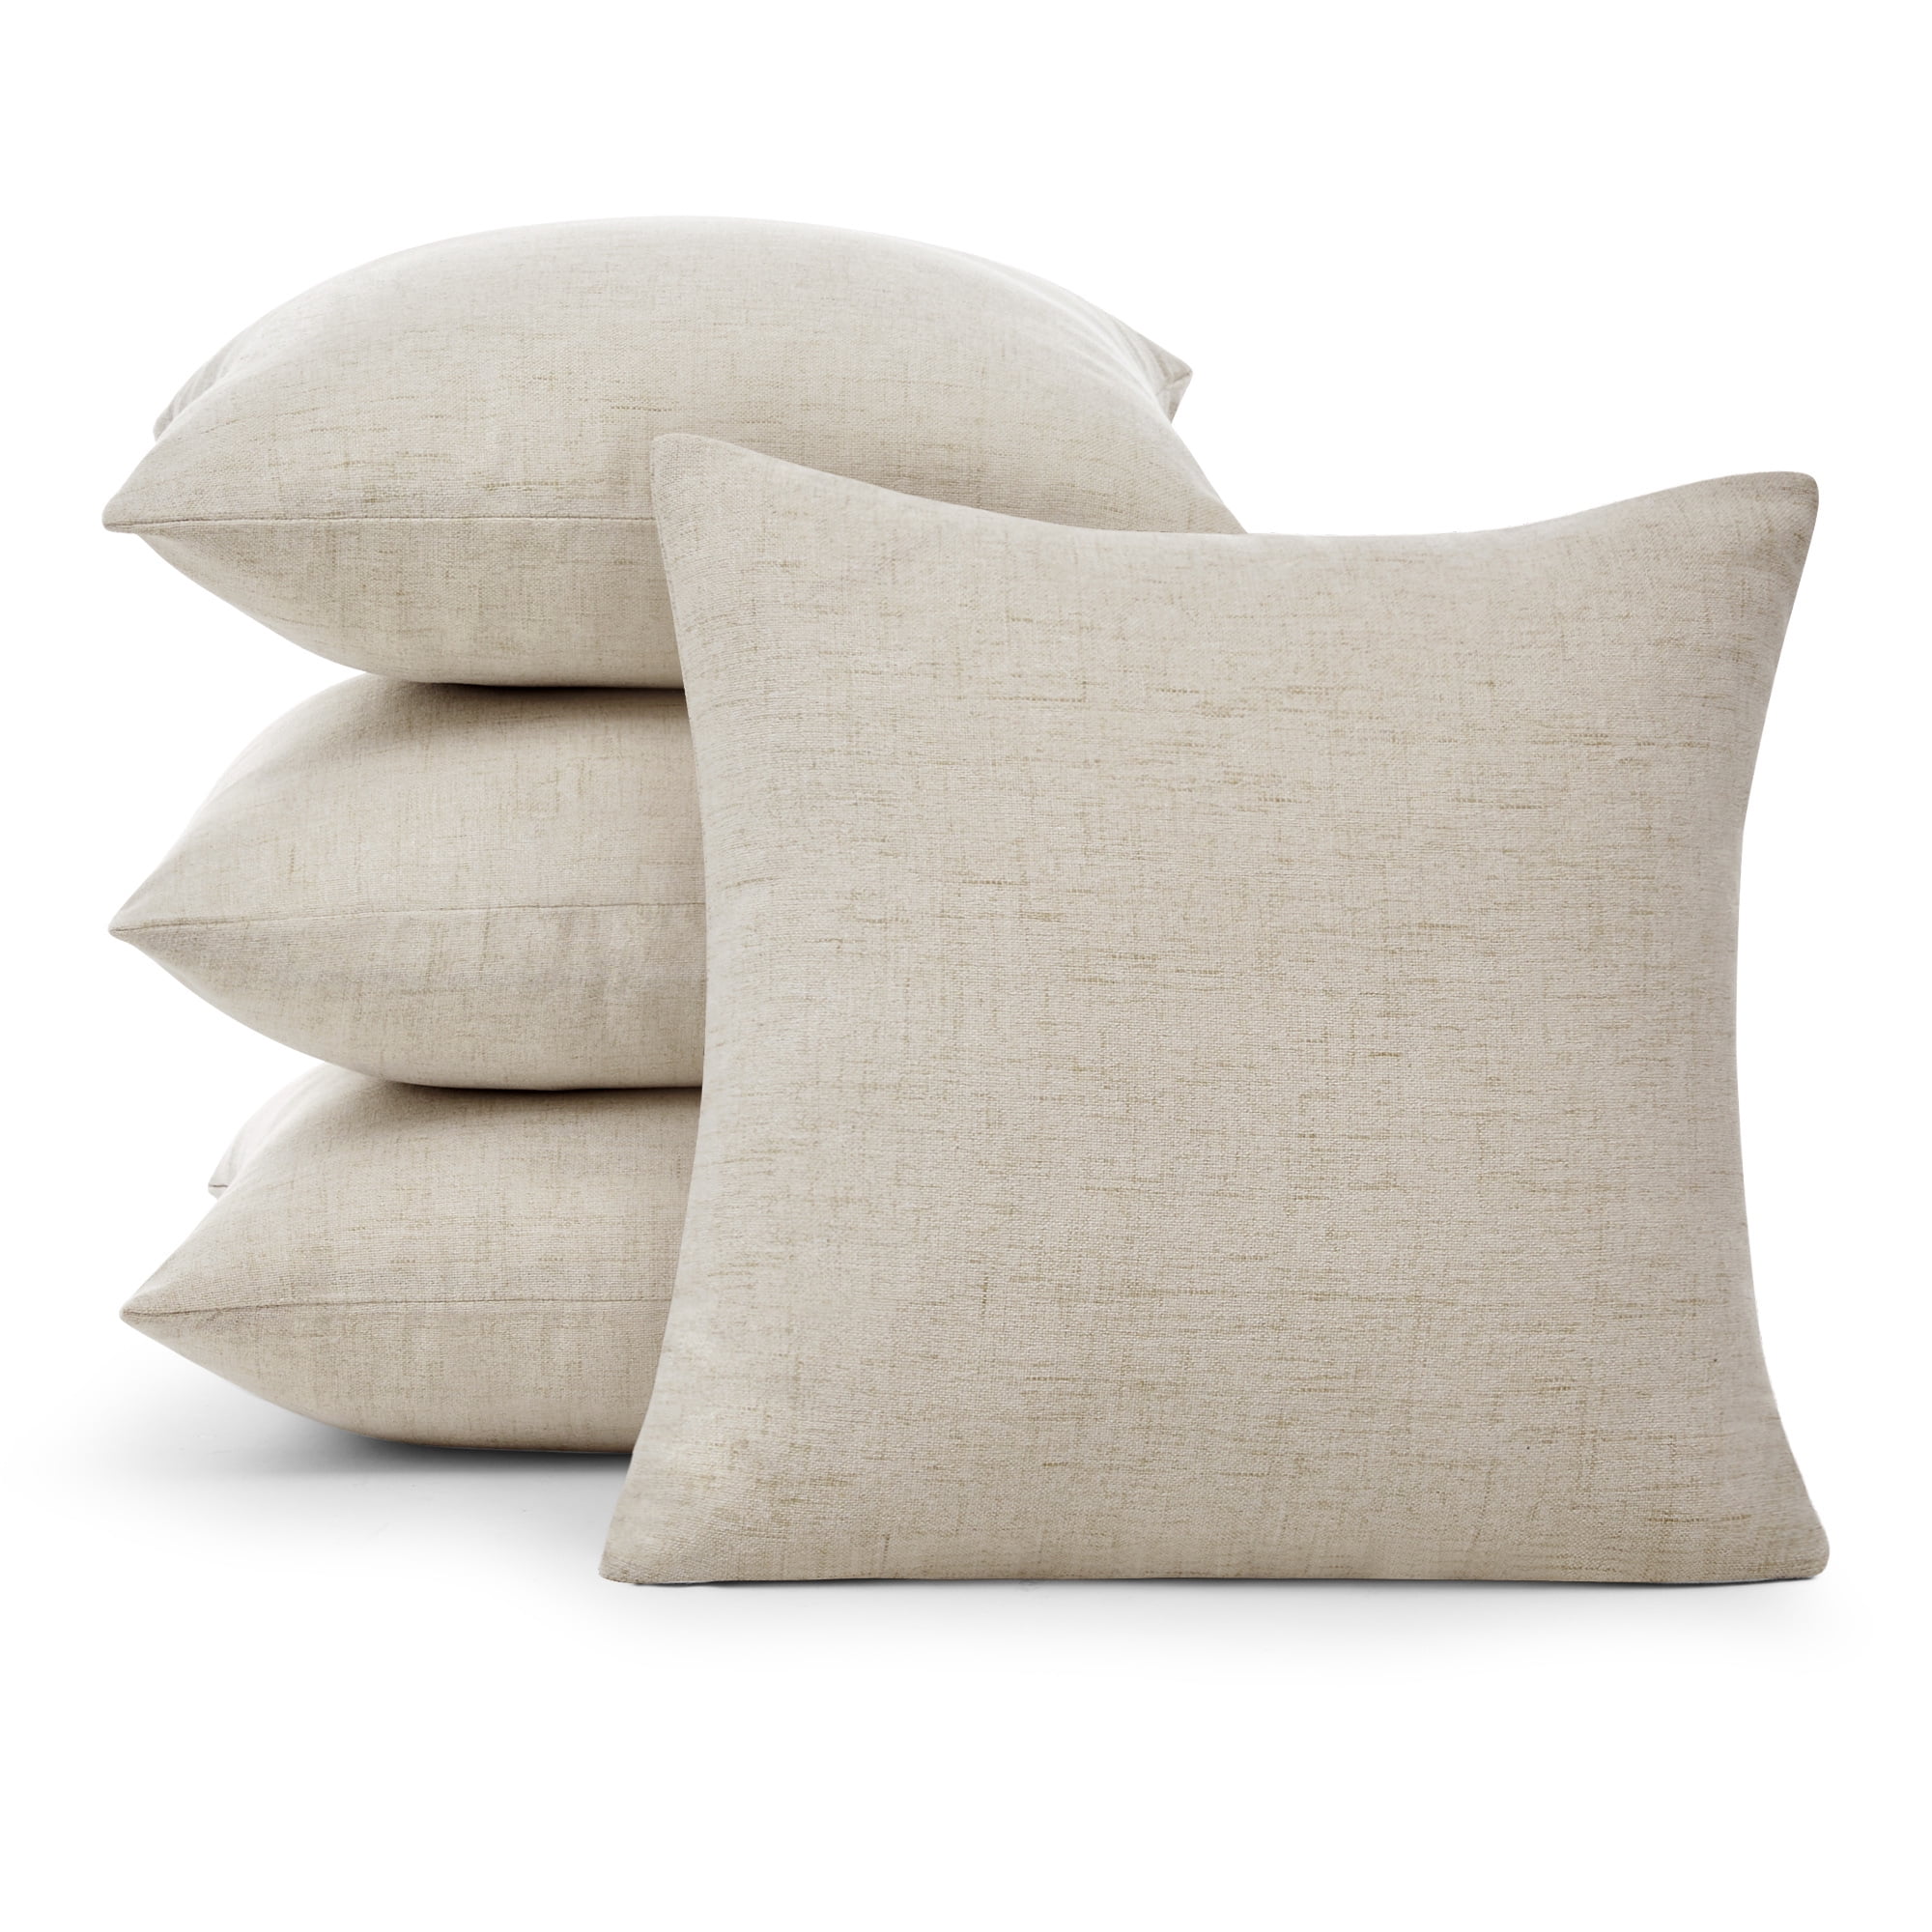 Design Imports Assorted Farmhouse Pillow Covers 18x18 Set of 4 - 20155336